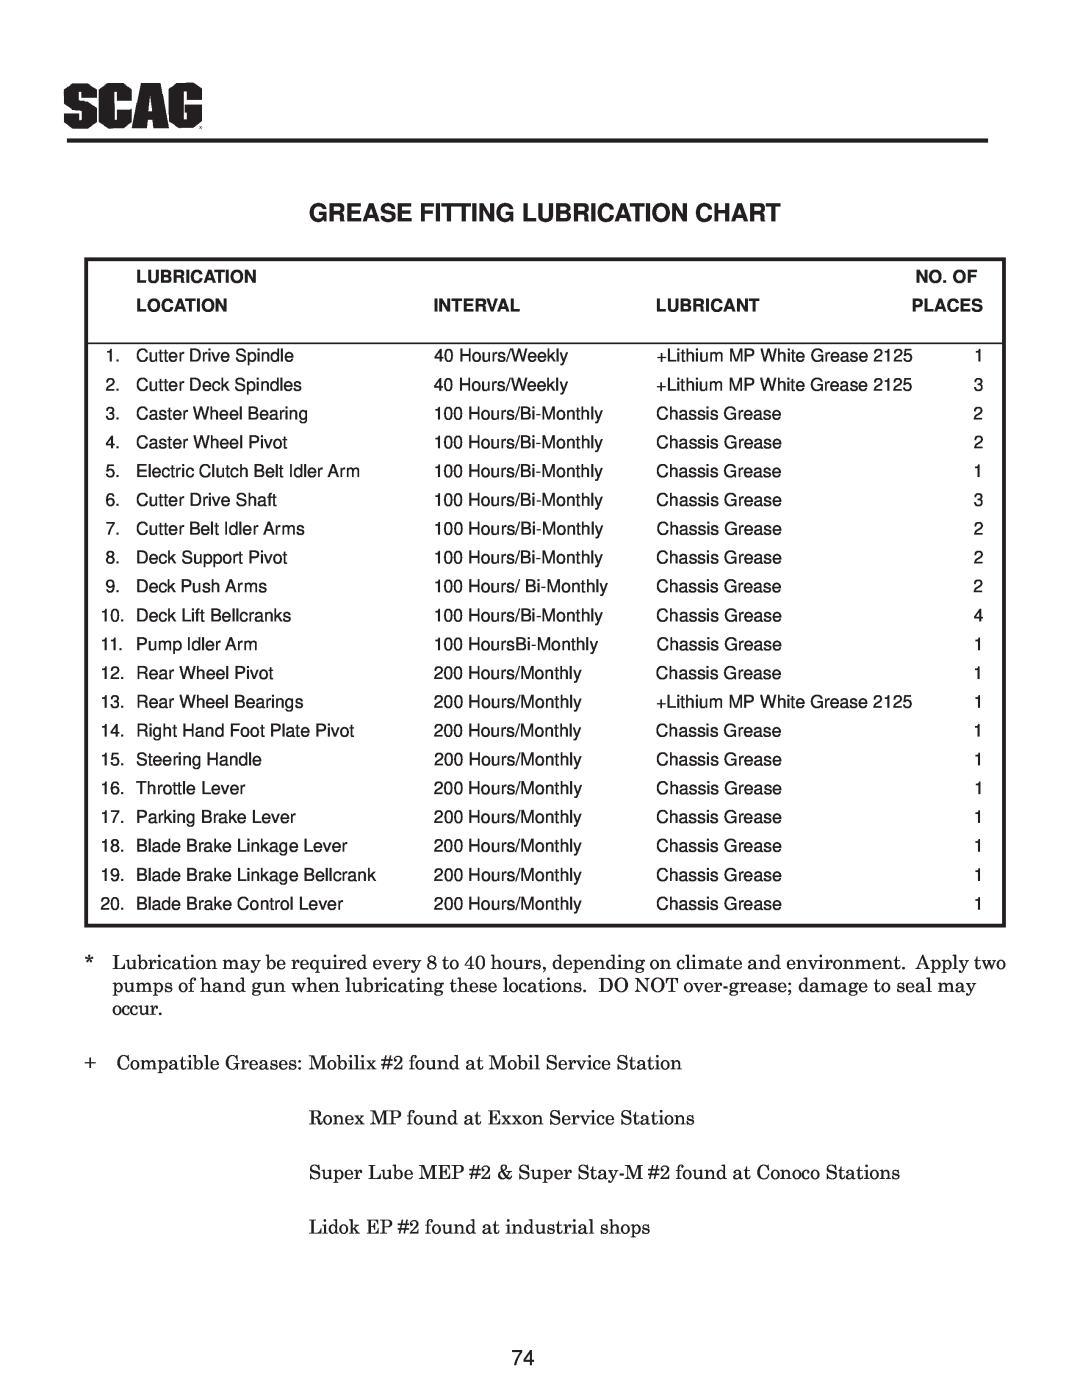 Scag Power Equipment MAG manual Grease Fitting Lubrication Chart, No. Of, Location, Interval, Lubricant, Places 